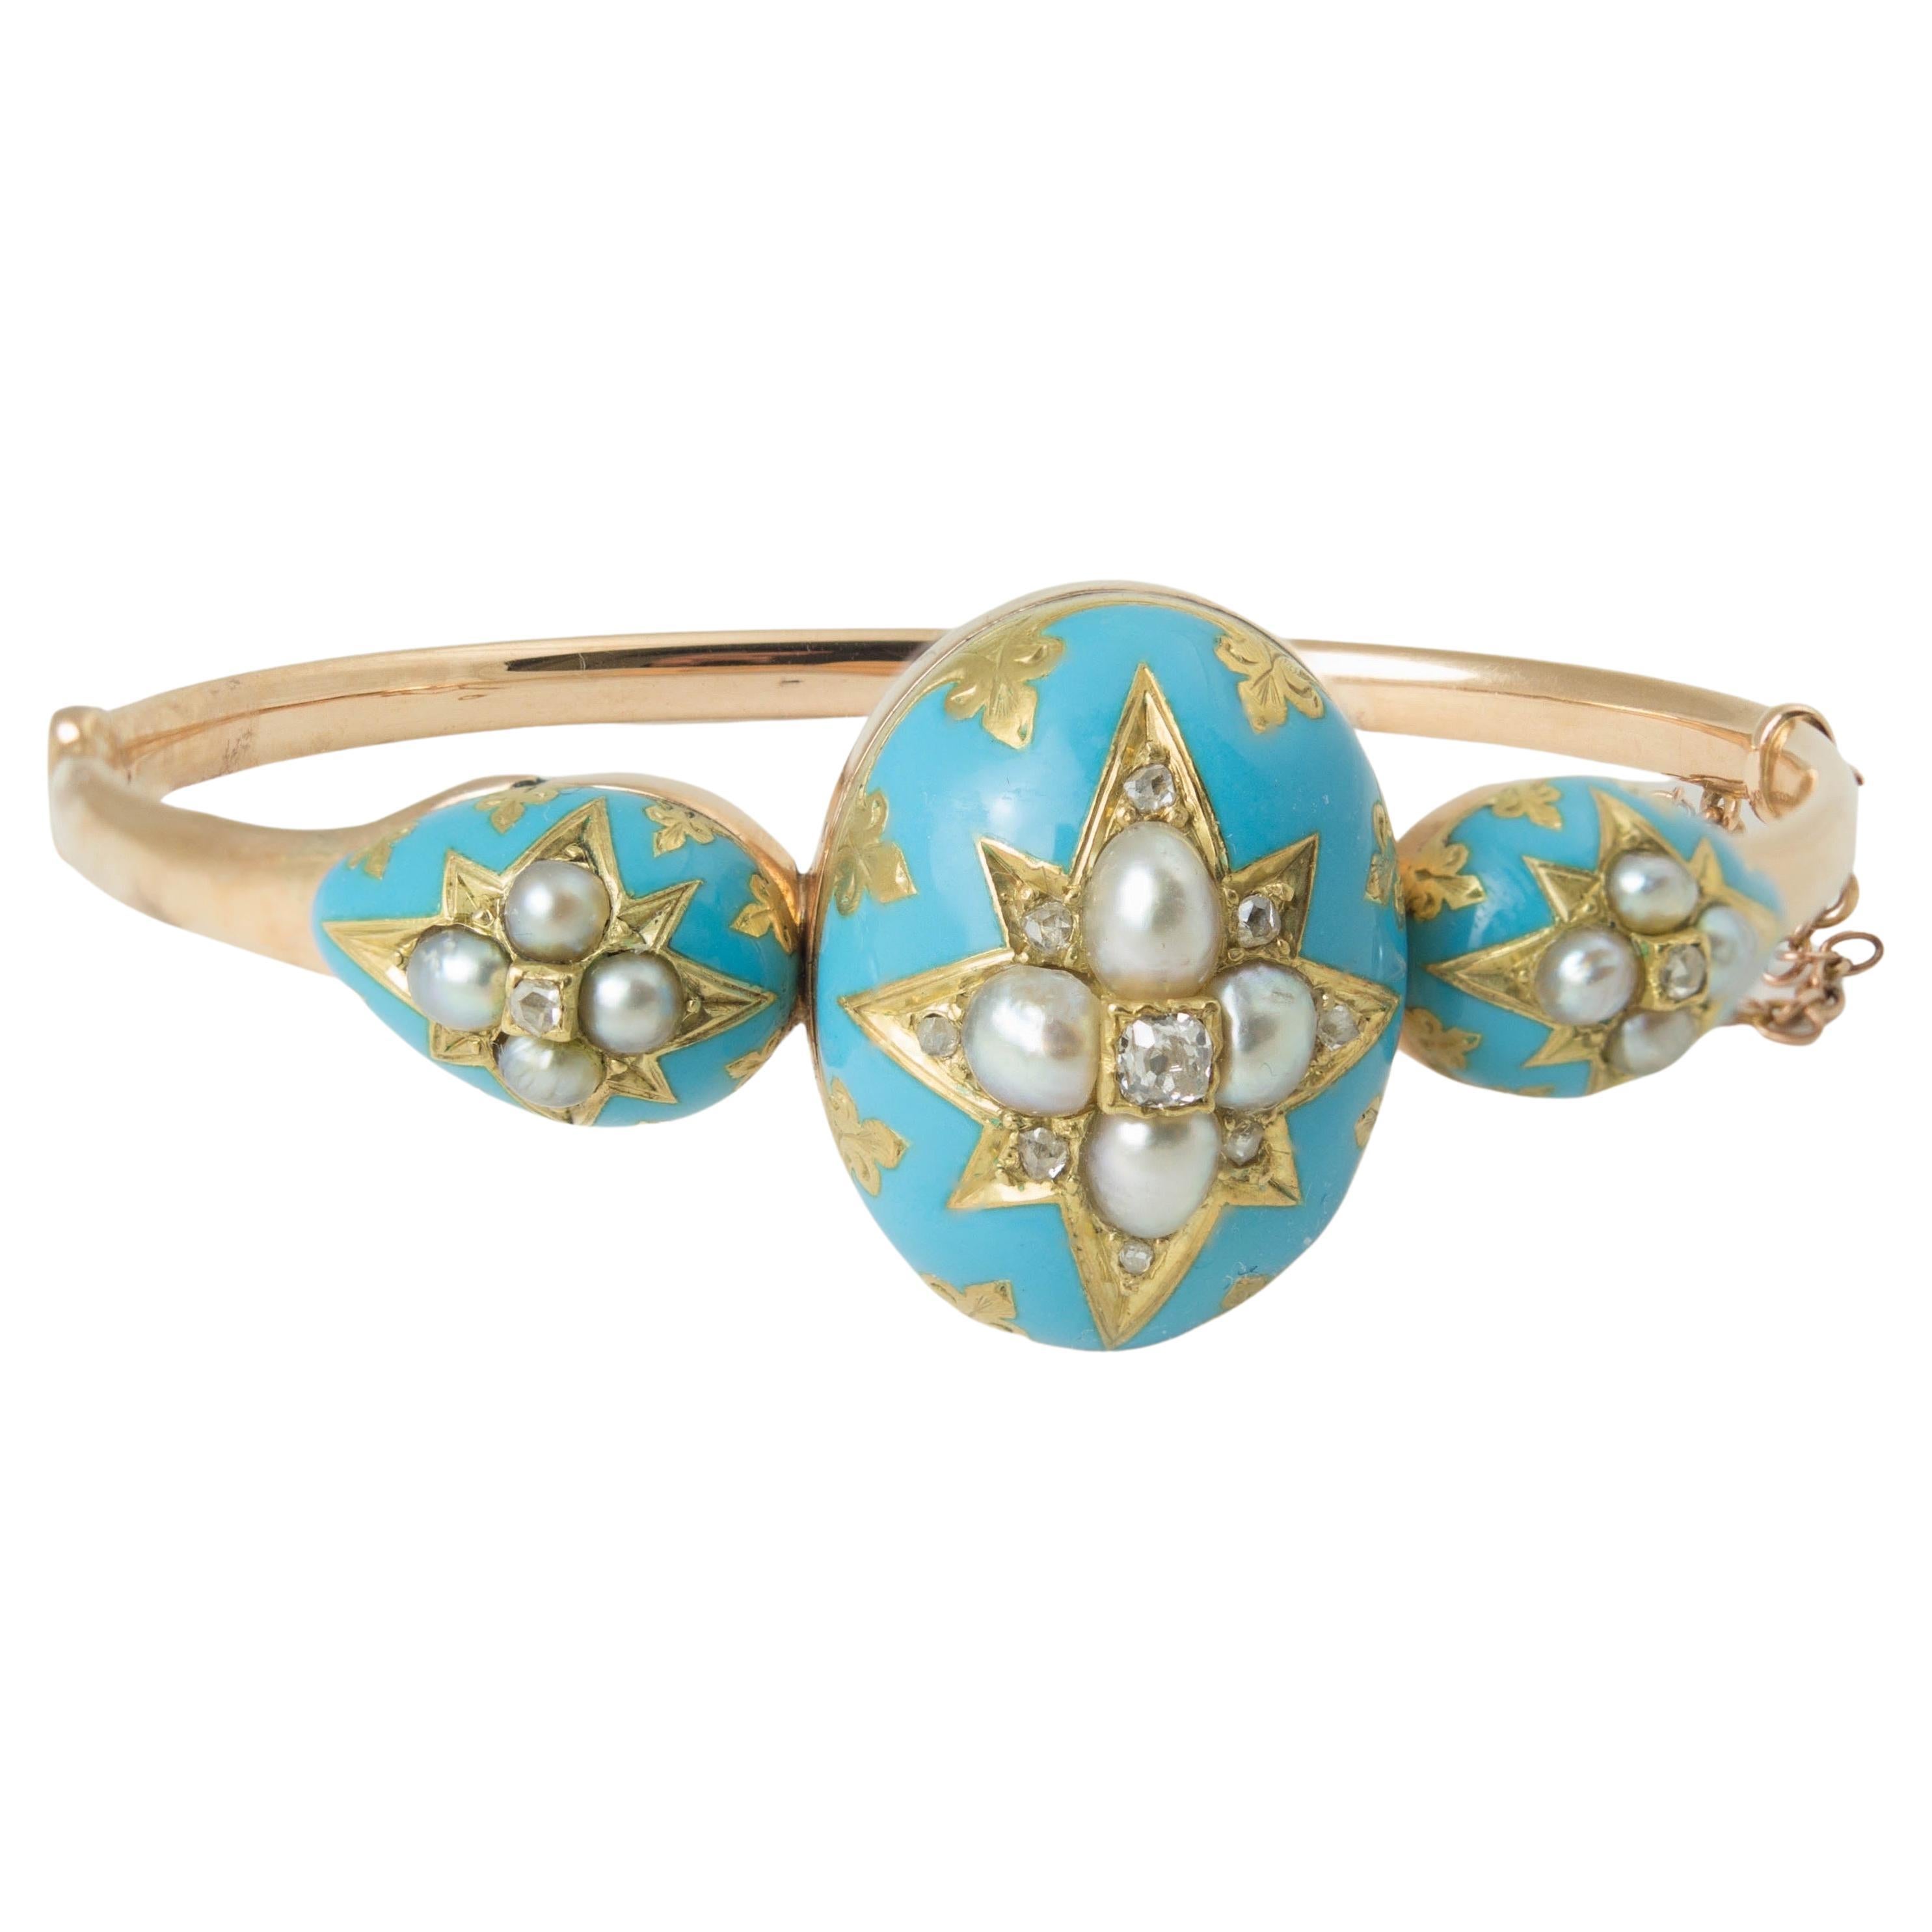 Antique Victorian Turquoise Blue Enamel Gold Bracelet with Diamonds and Pearls